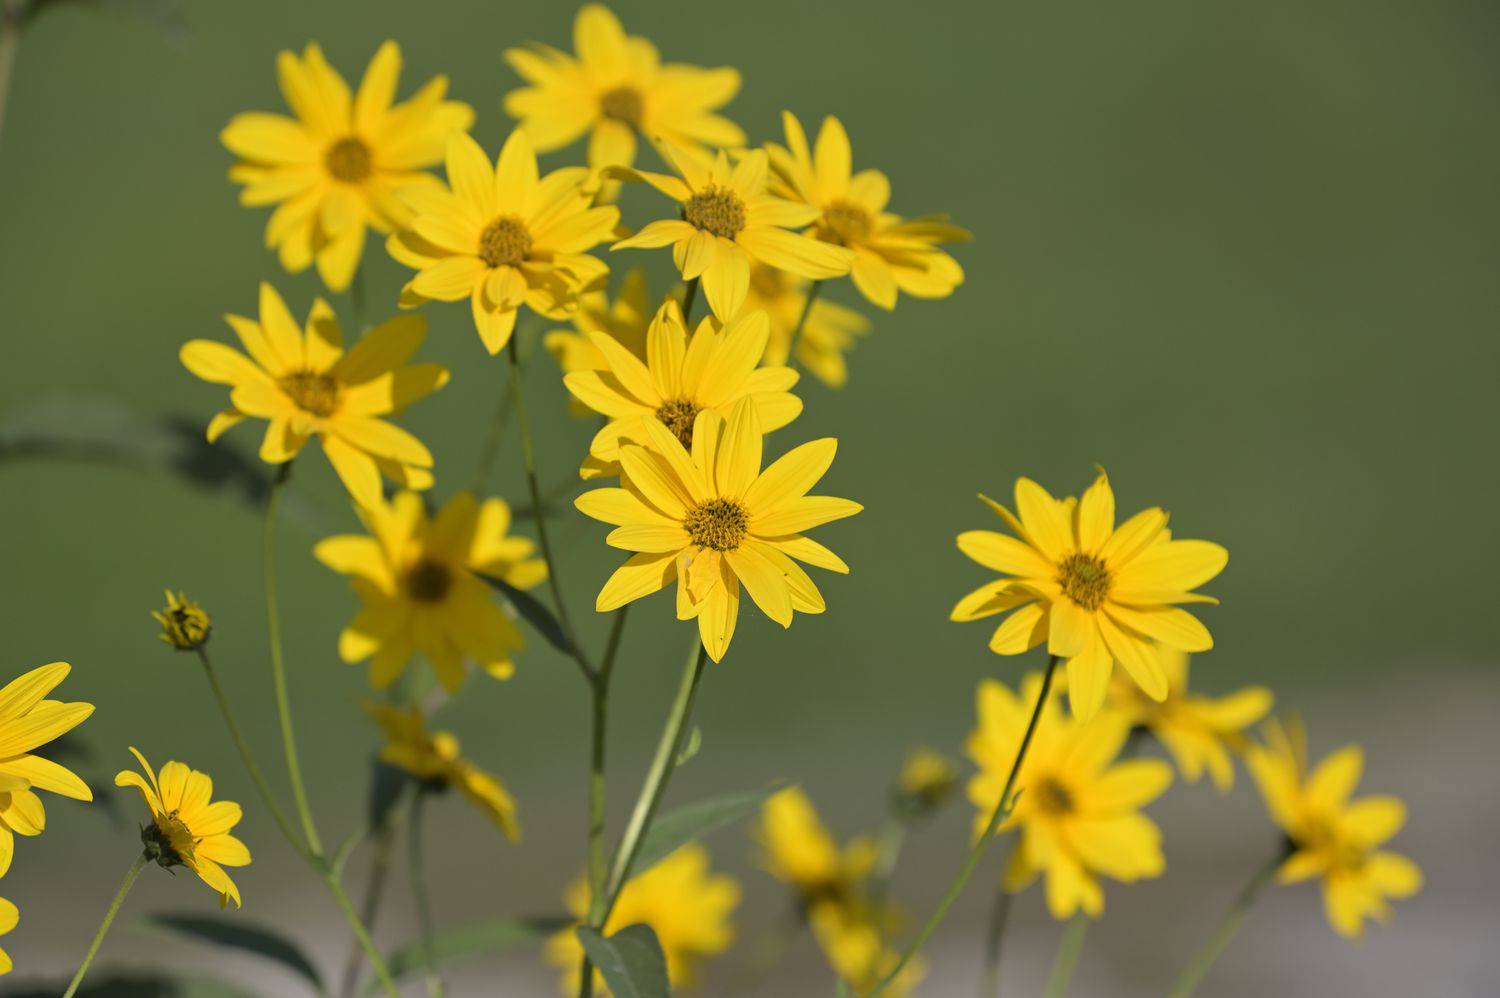 bright yellow flower with golden yellow centers against green outdoor background